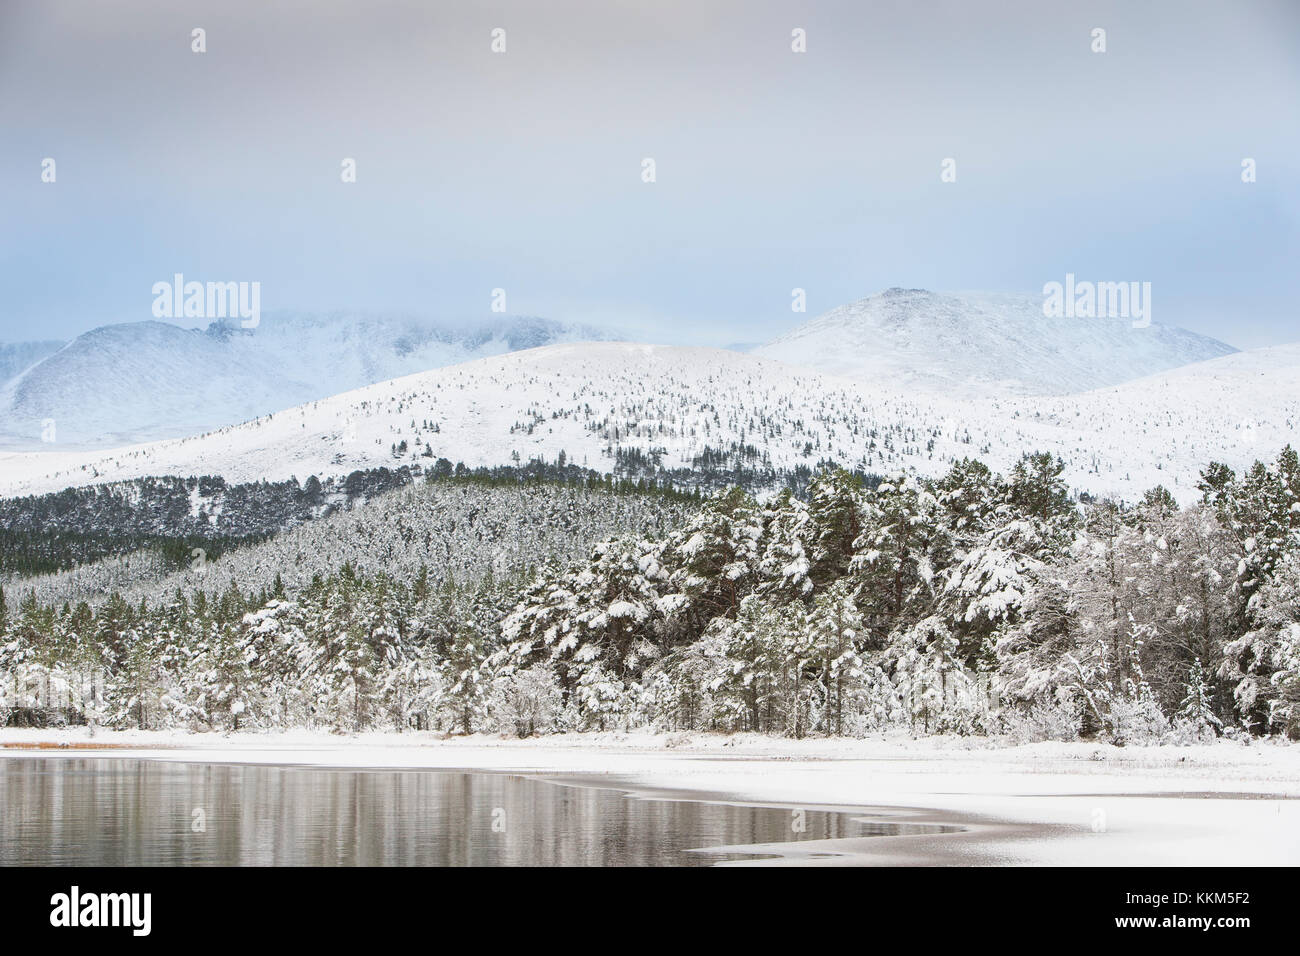 Winter on Loch Morlich in the Cairngorms National Park of Scotland. Stock Photo